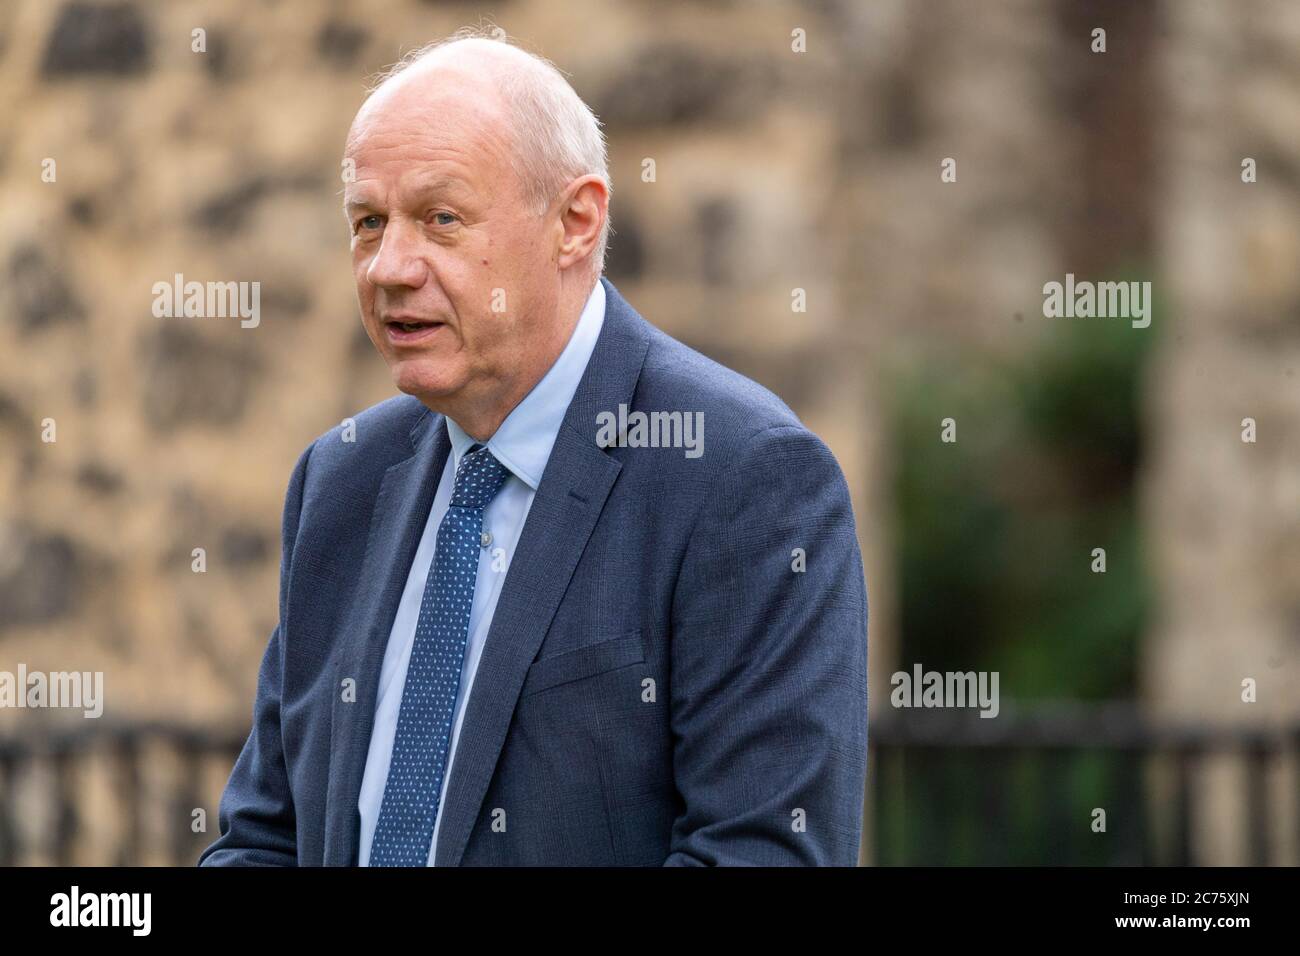 London, UK. 14th July, 2020. MP's in Westminster Damian Green Conservative MP for Ashford being interviewed on College Green, Westminster London Credit: Ian Davidson/Alamy Live News Stock Photo